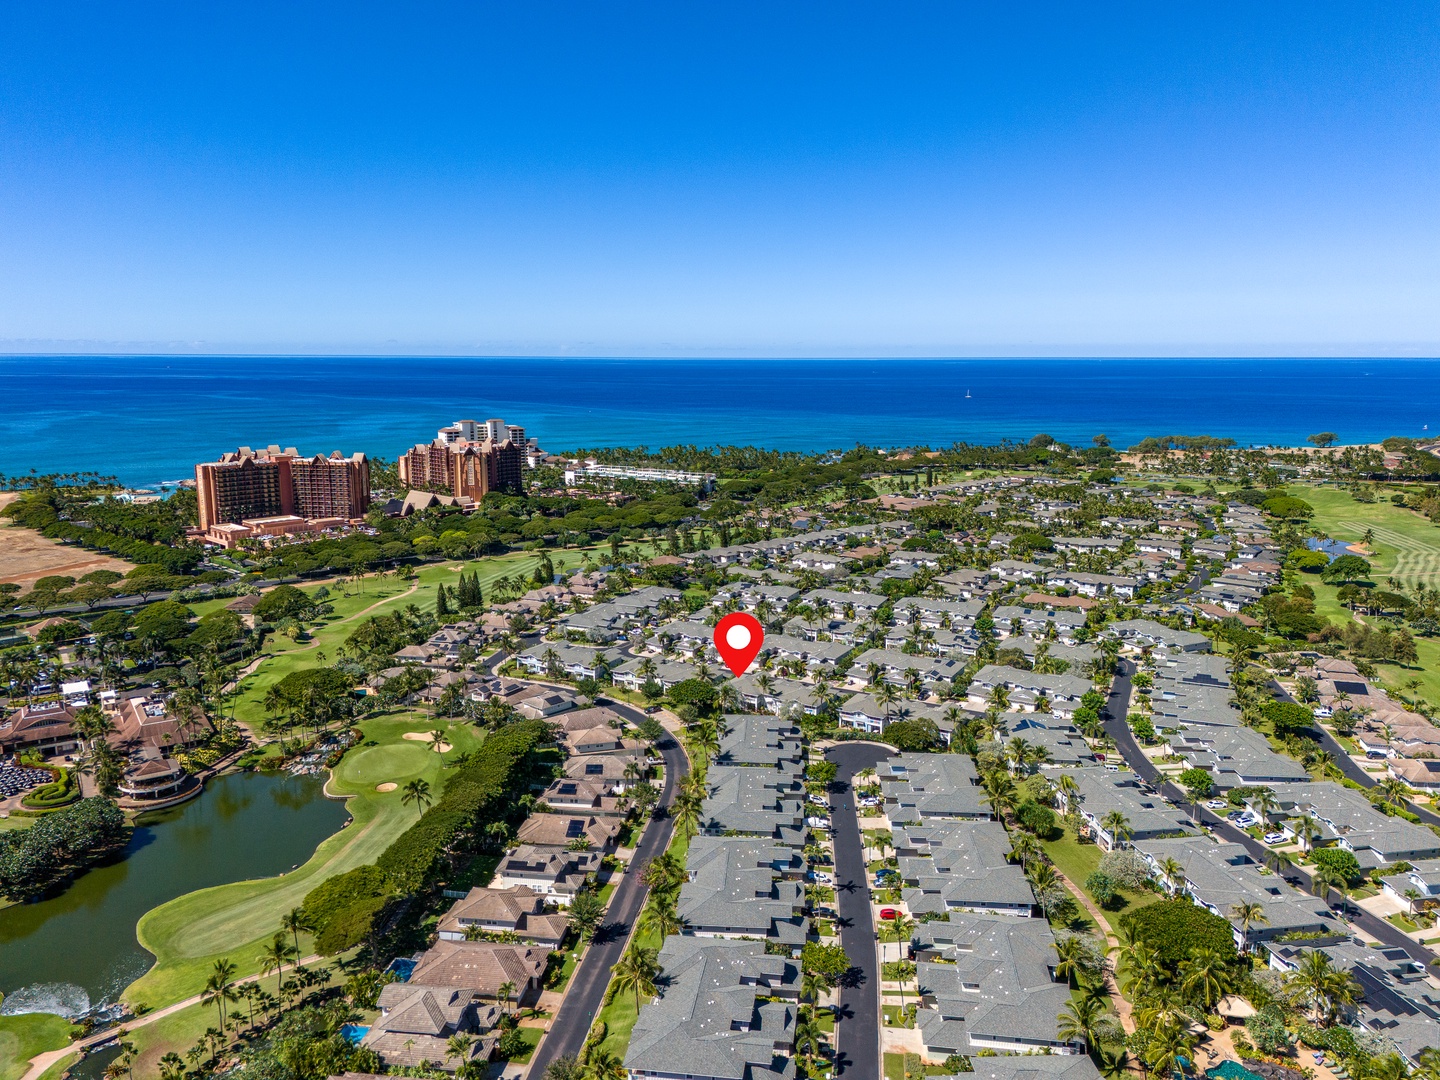 Kapolei Vacation Rentals, Ko Olina Kai 1097C - Map pin of the location of your home.